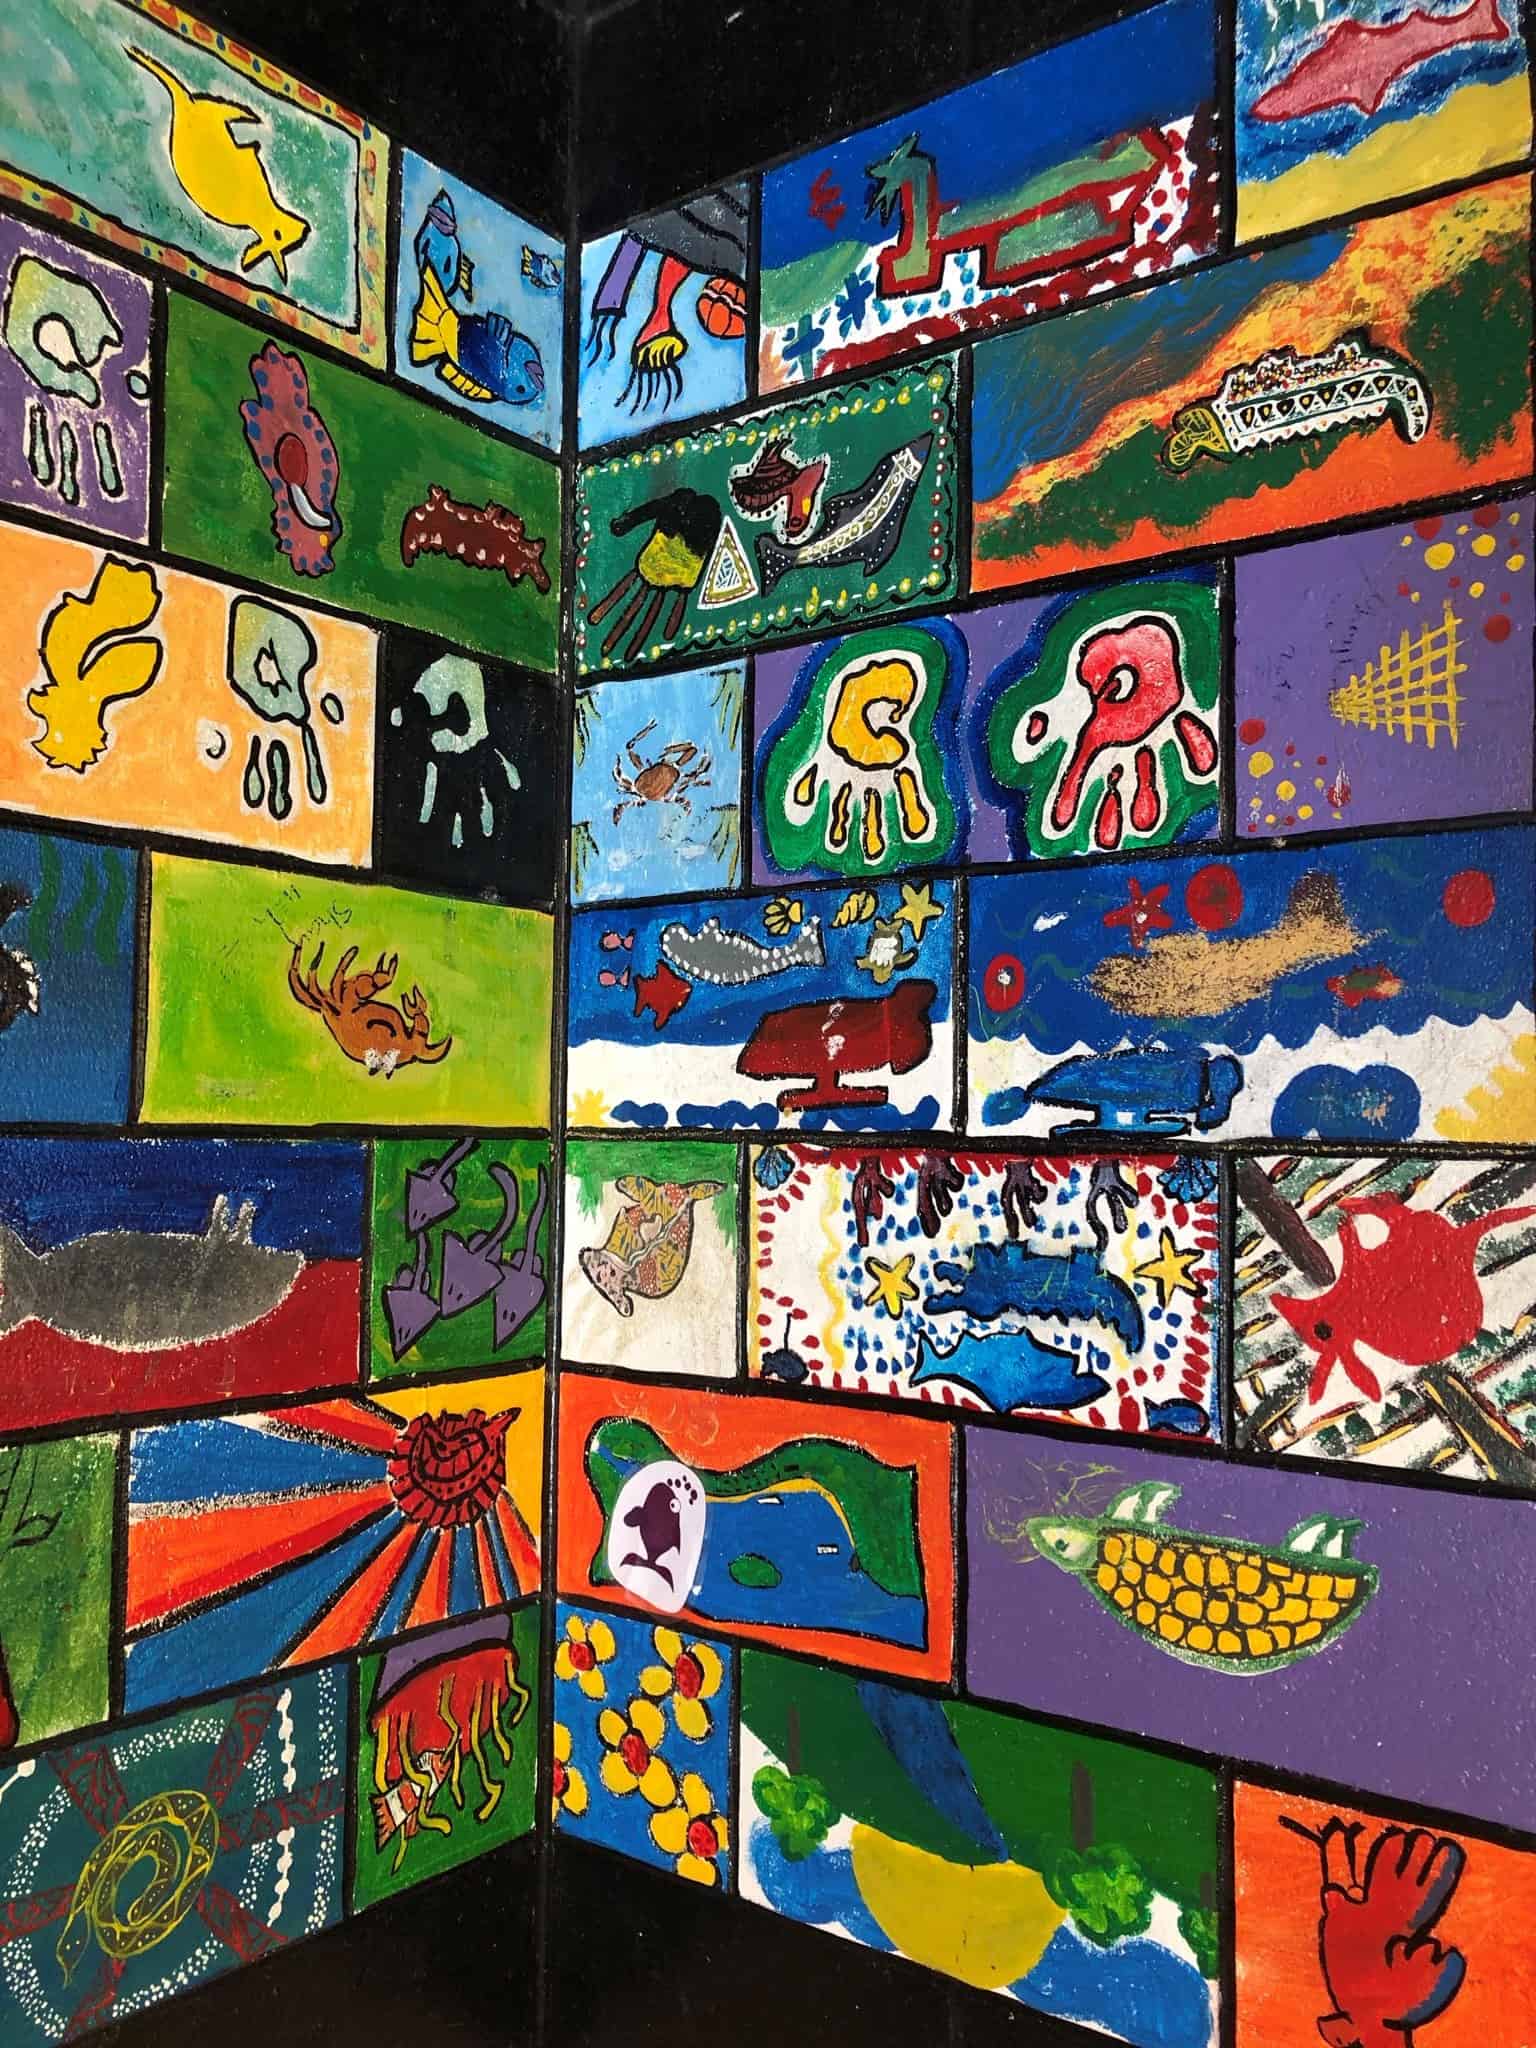 Artwork at the Primary School